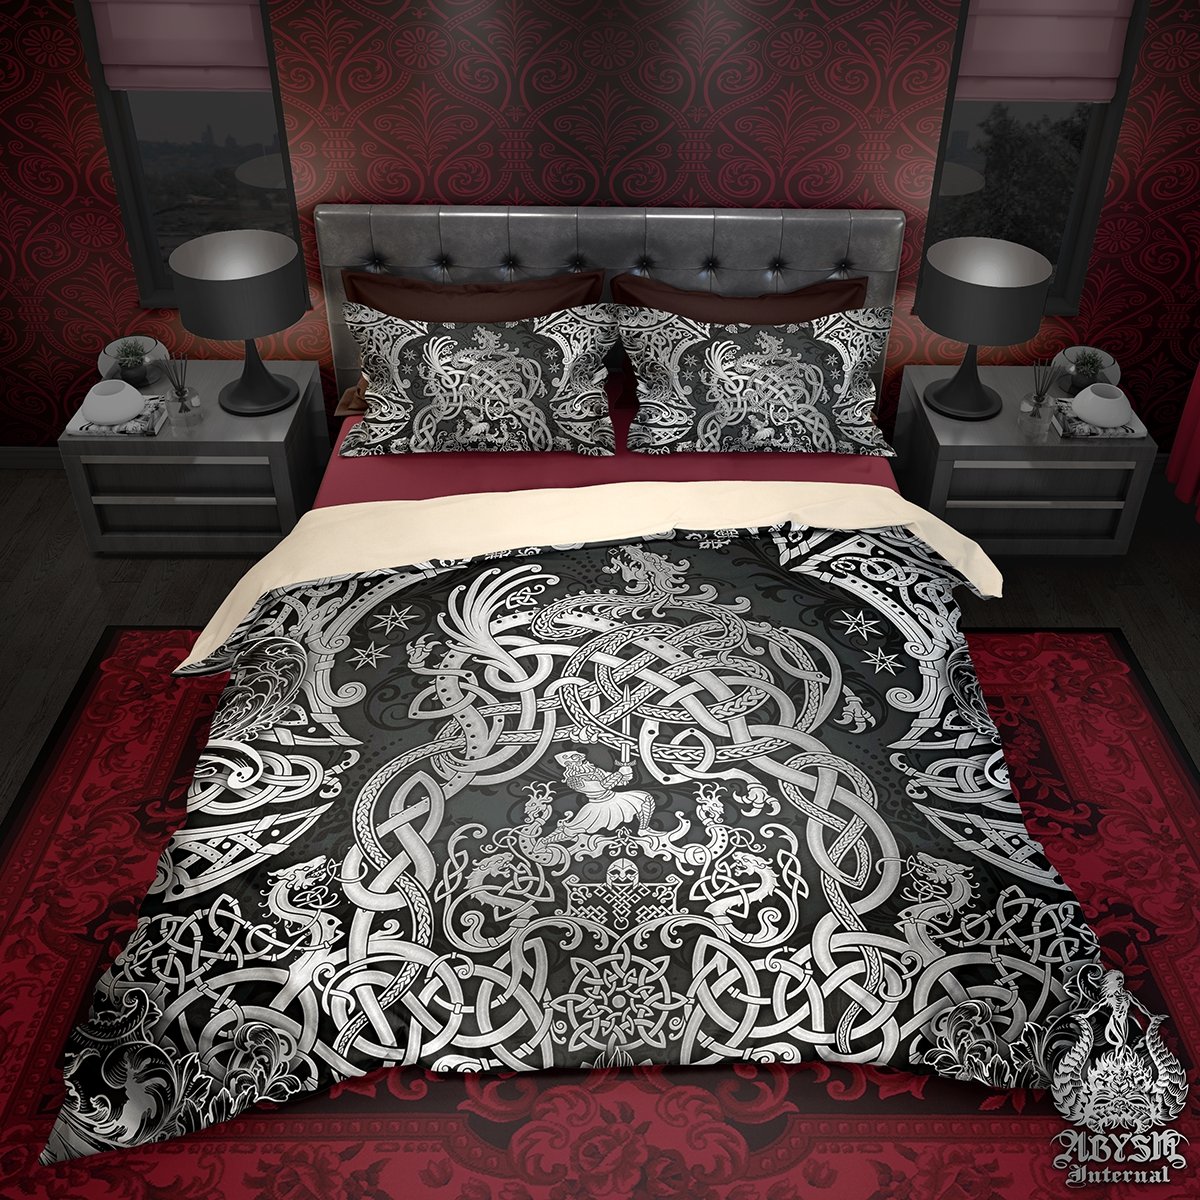 Viking Bedding Set, Comforter and Duvet, Norse Bed Cover and Bedroom Decor, Nordic Art, Sigurd kills Dragon Fafnir, King, Queen and Twin Size - Dark - Abysm Internal